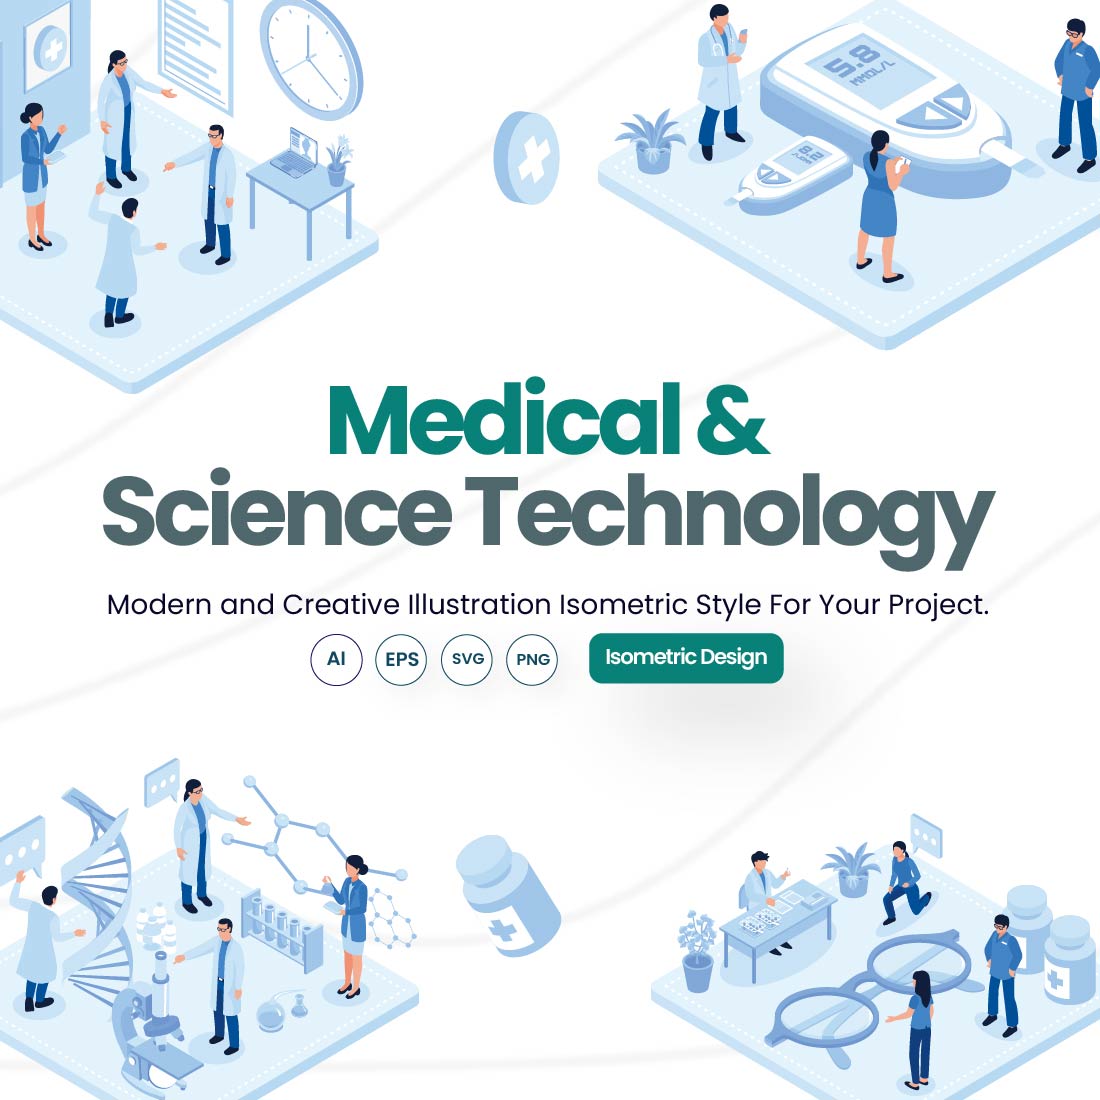 Illustration of Medical & Science Technology cover image.